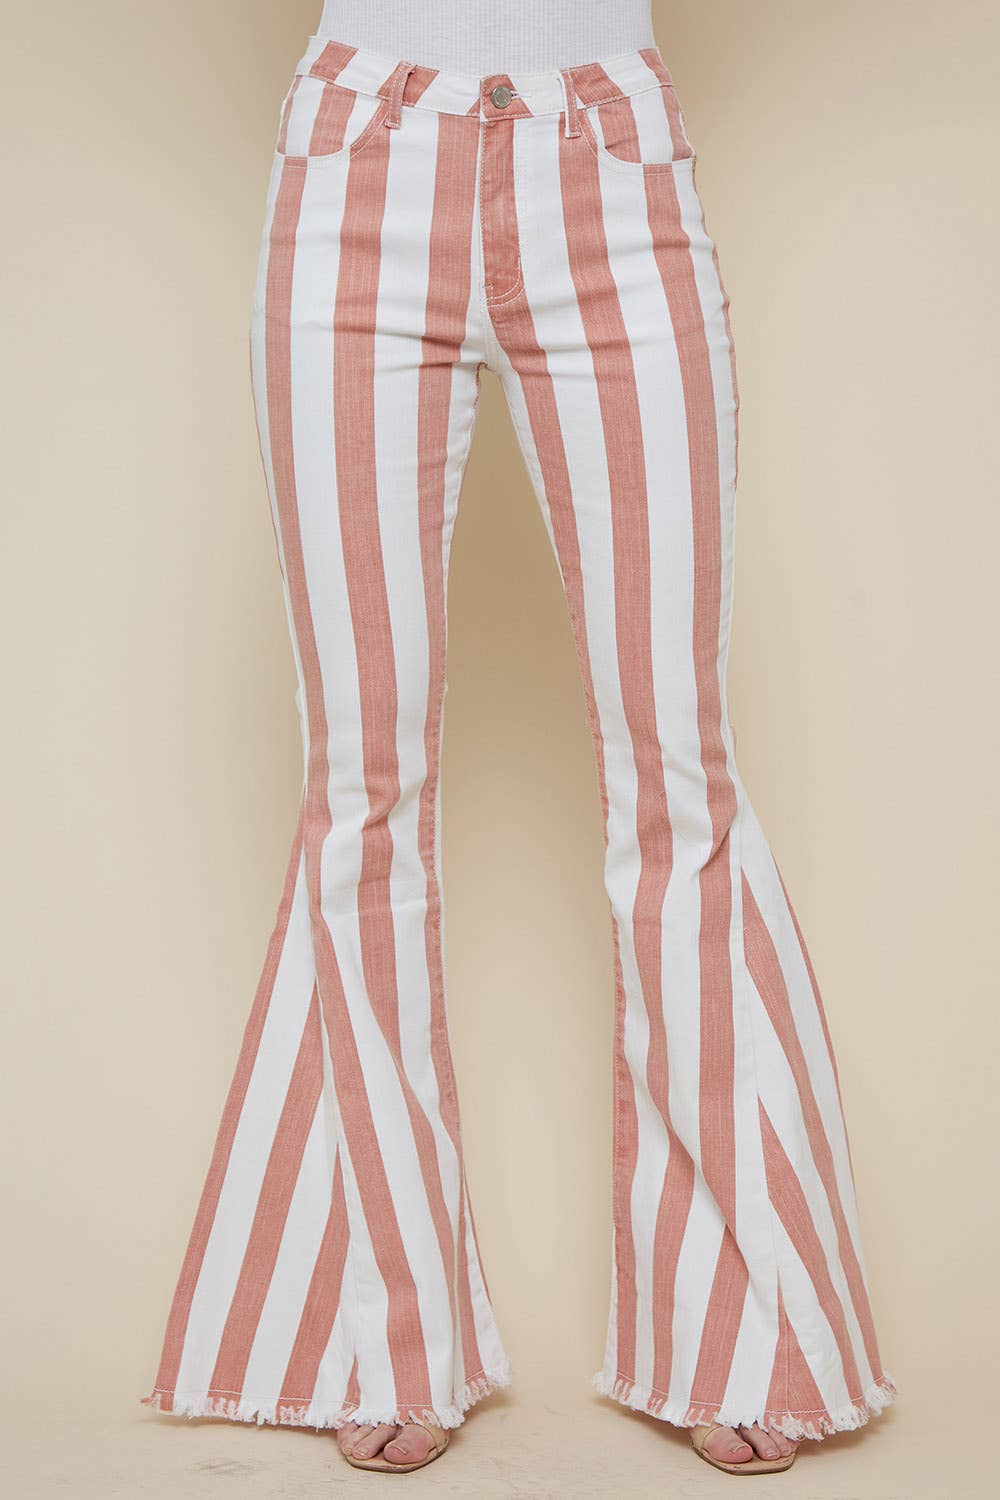 WISTERIA LANE - STRIPED FLARE BELLBOTTOM JEANS - CORAL (7816407056611)